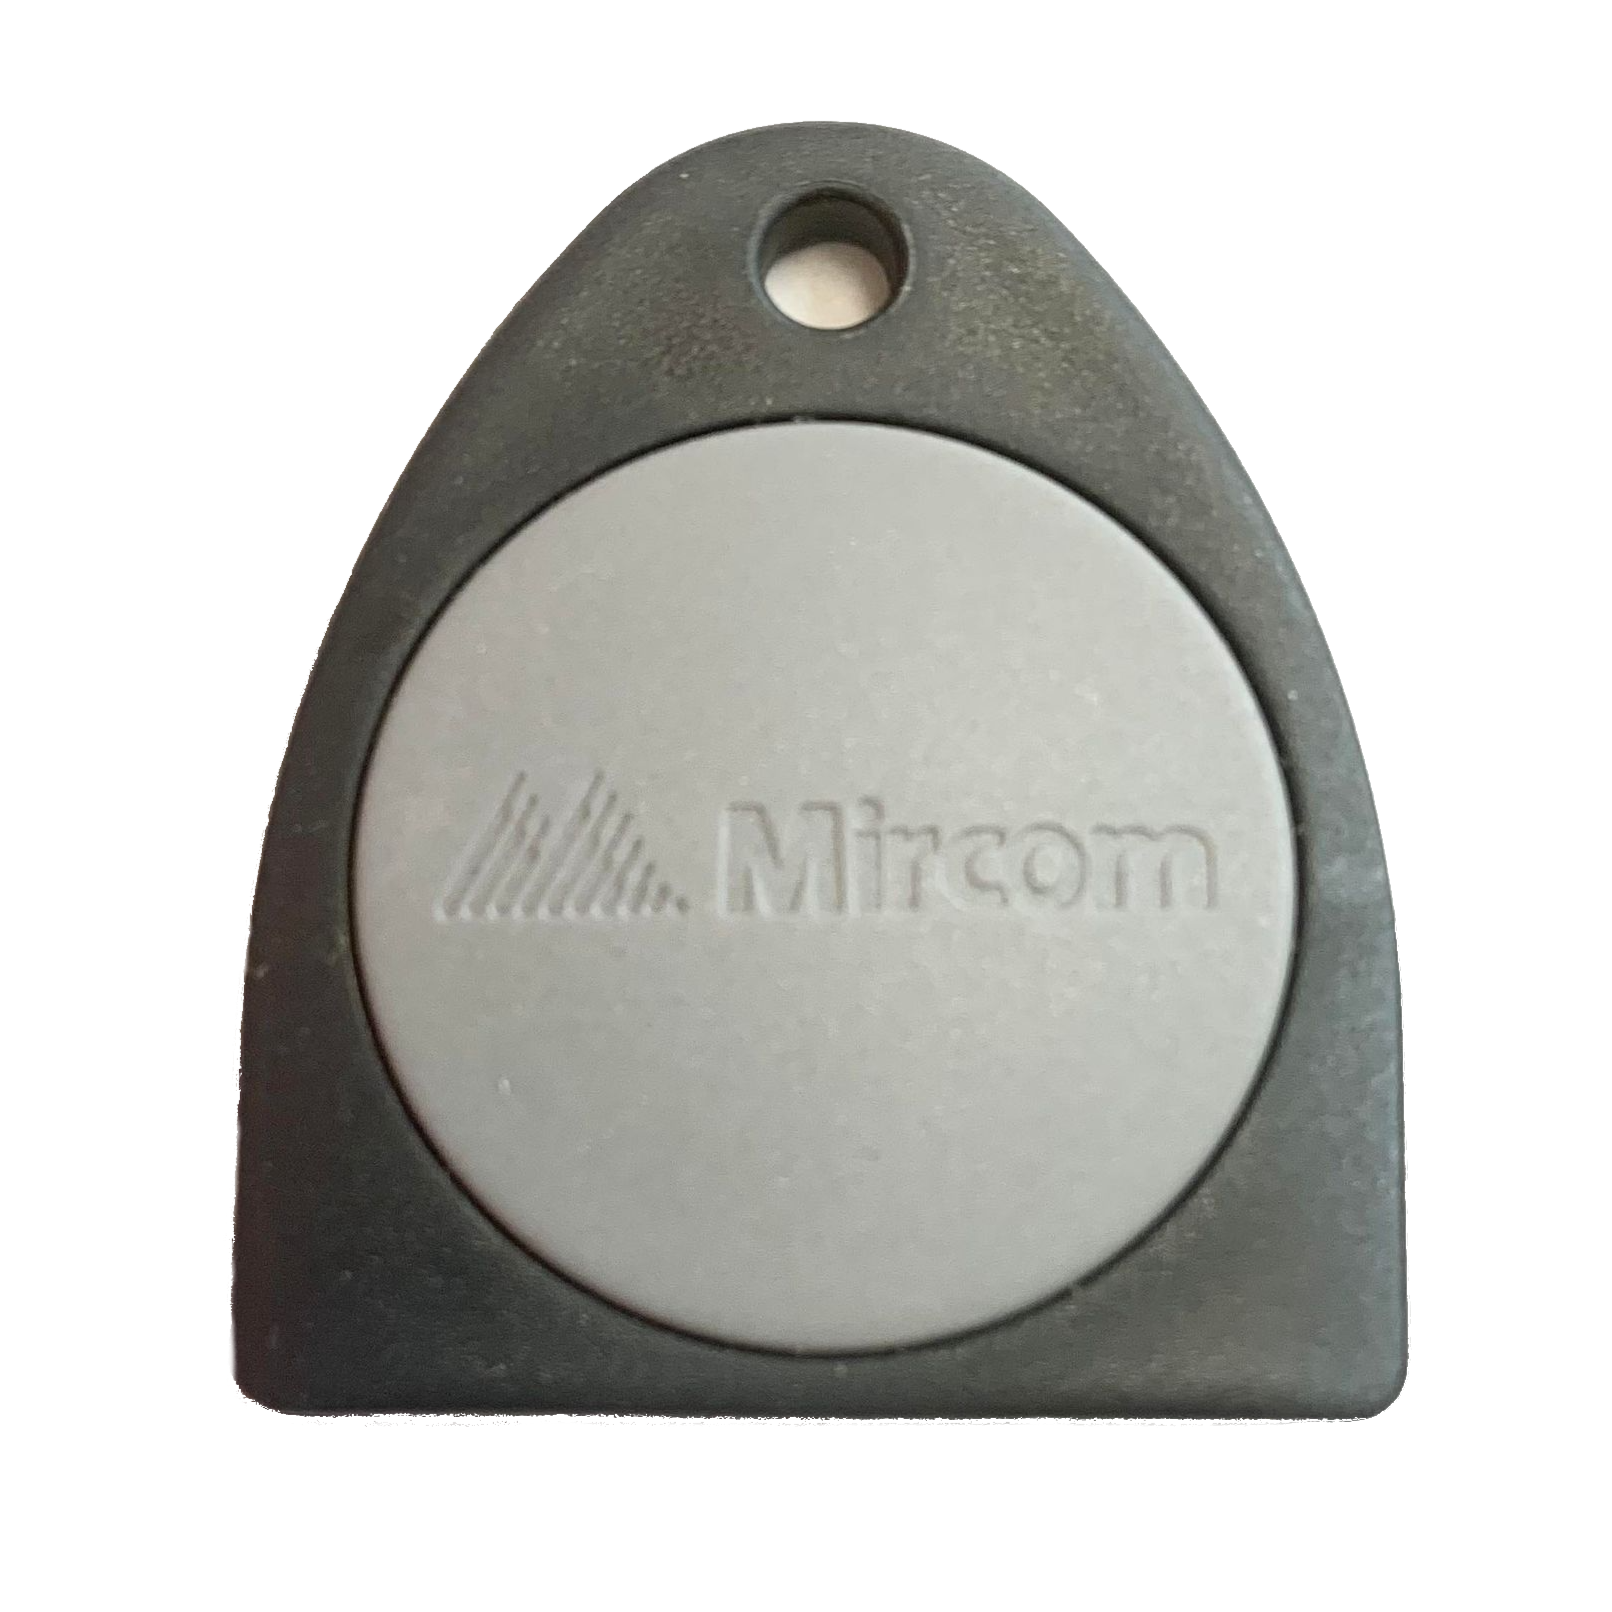 Mircom fob system key tag copying salto where to clone ioprox where to clone awid fob where to clone HID iClass How to clone HID iClass SE encrypted fob close to me locksmith fob dup key fob copy fast convenient quick rental amazon keysy RFID encrypted encryption minutefob best service amazing service easy to use express clonemykey minute key minute fob RFID cloner RFID writer guaranteed returns warranty manufacture replacement keyme